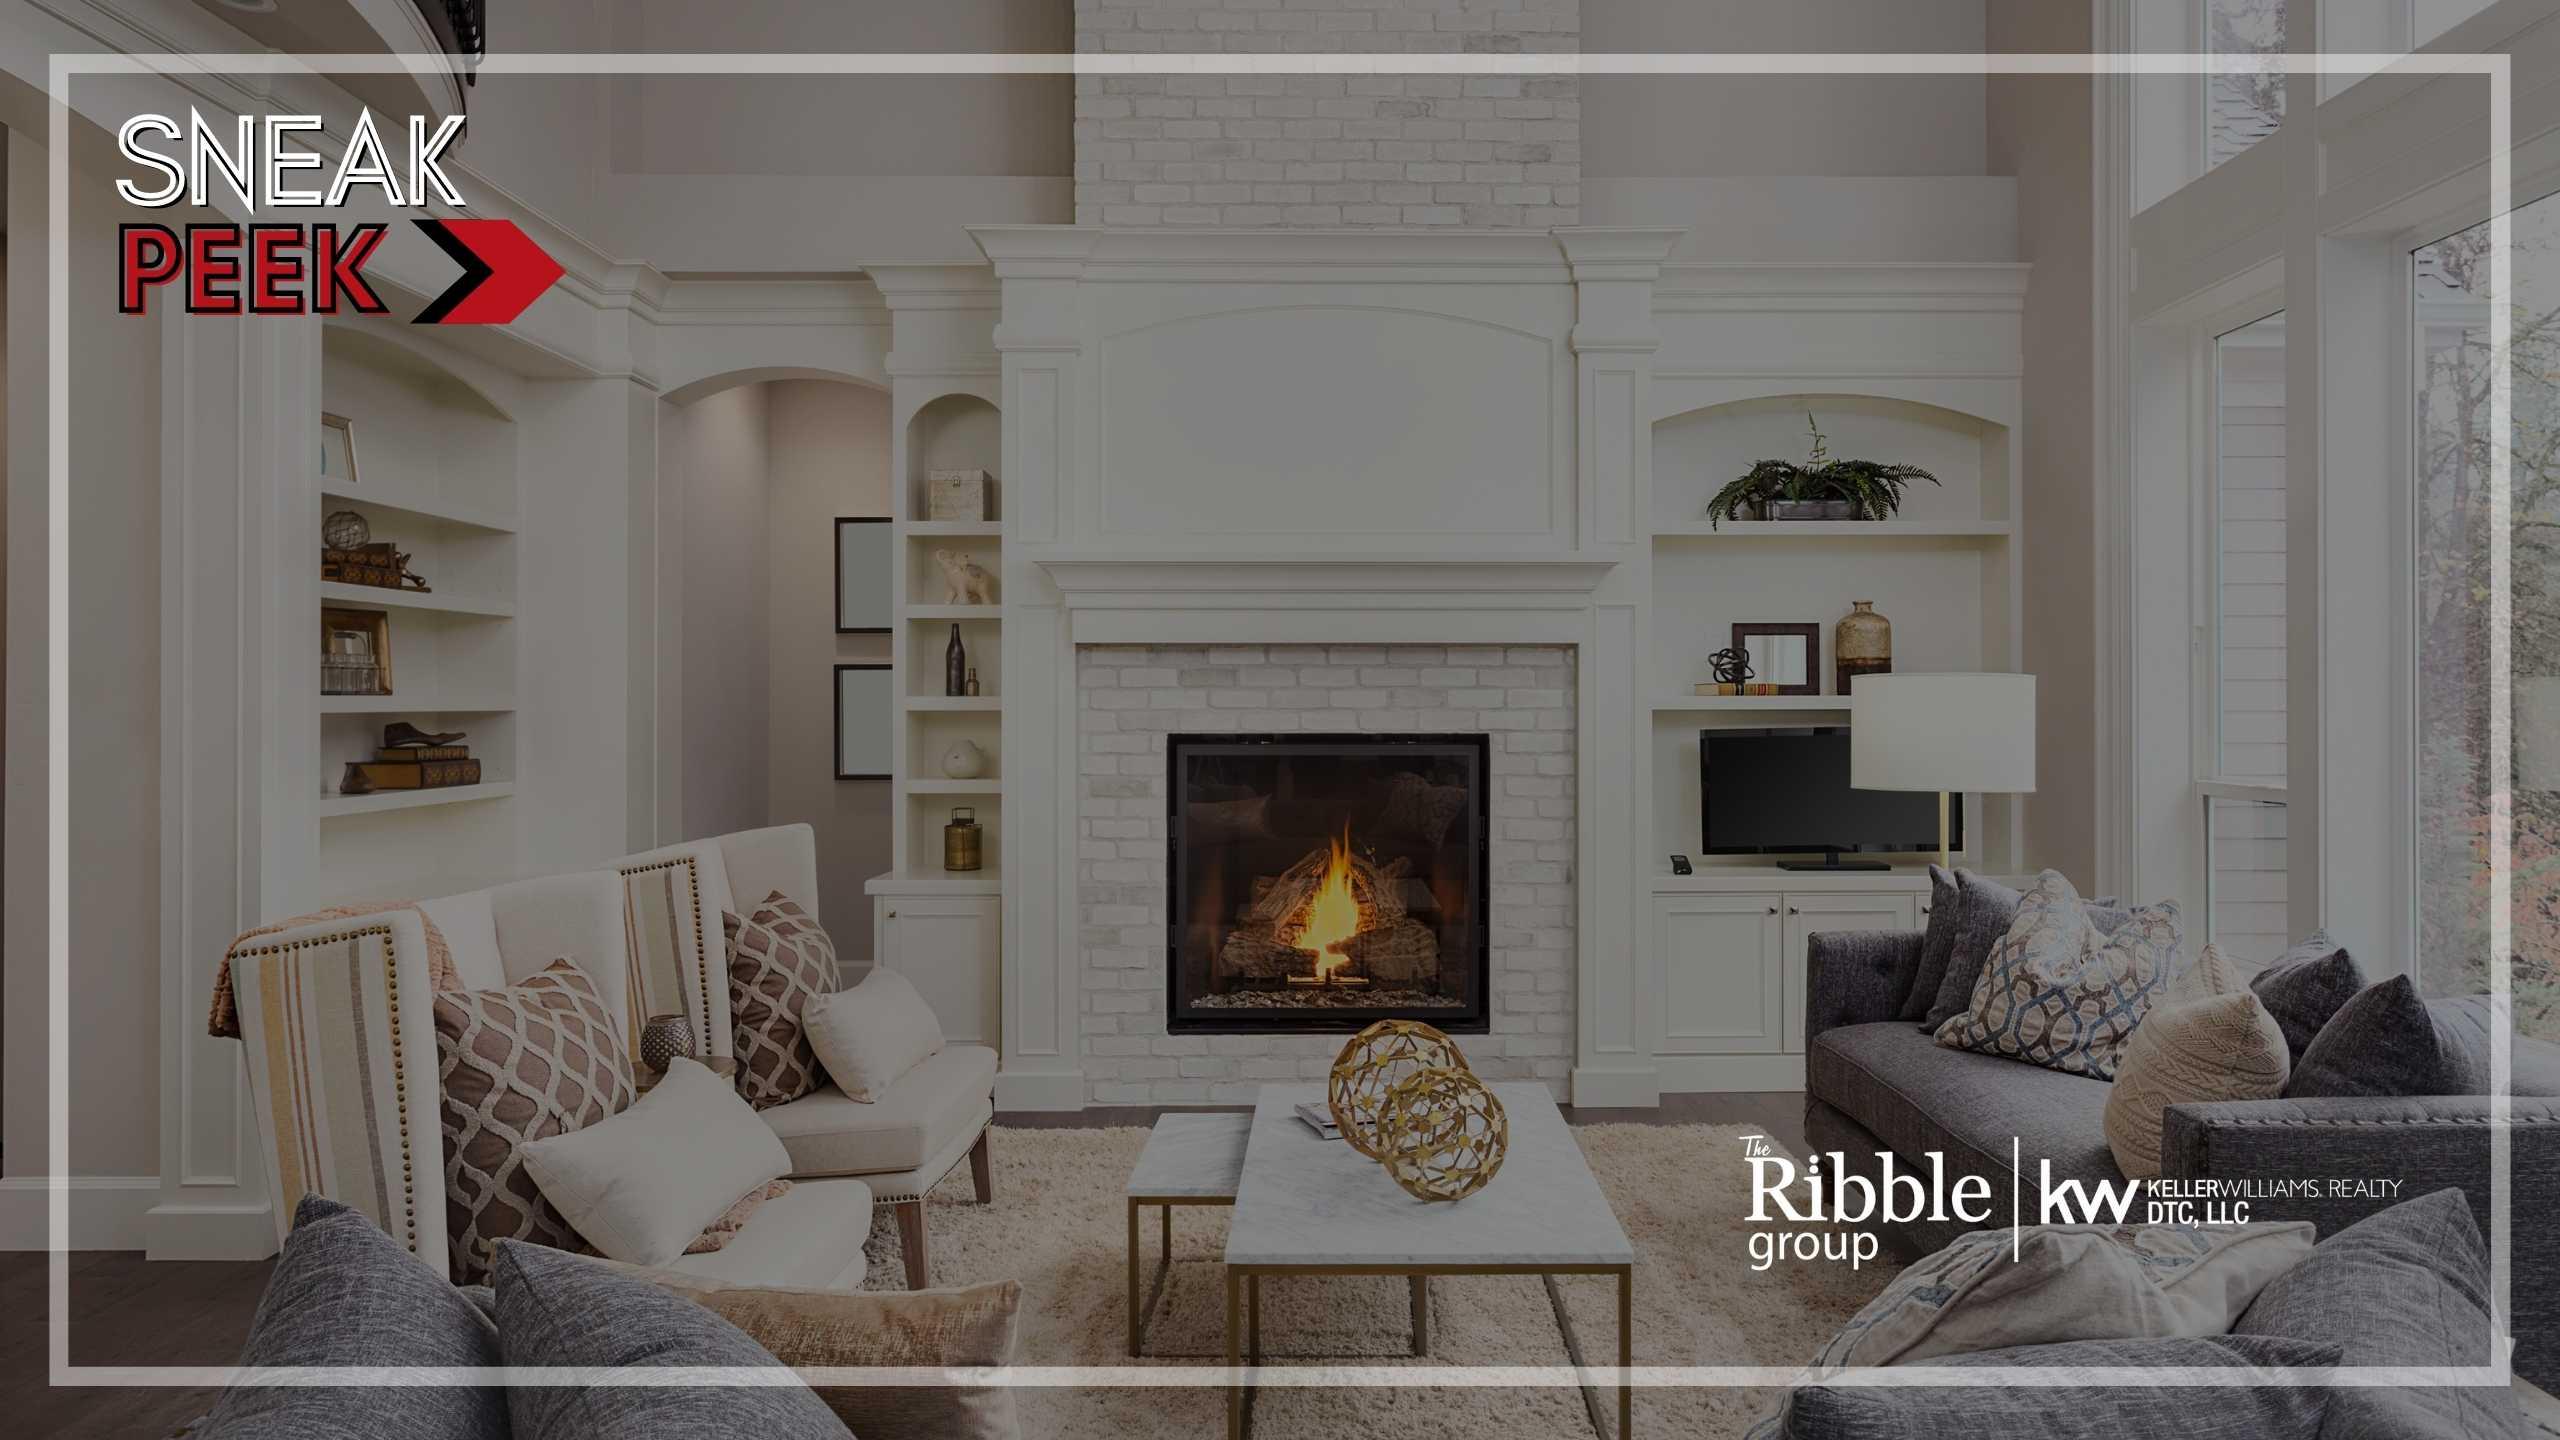 The Ribble Group’s Weekly List of Sneak Peek Homes for January 20